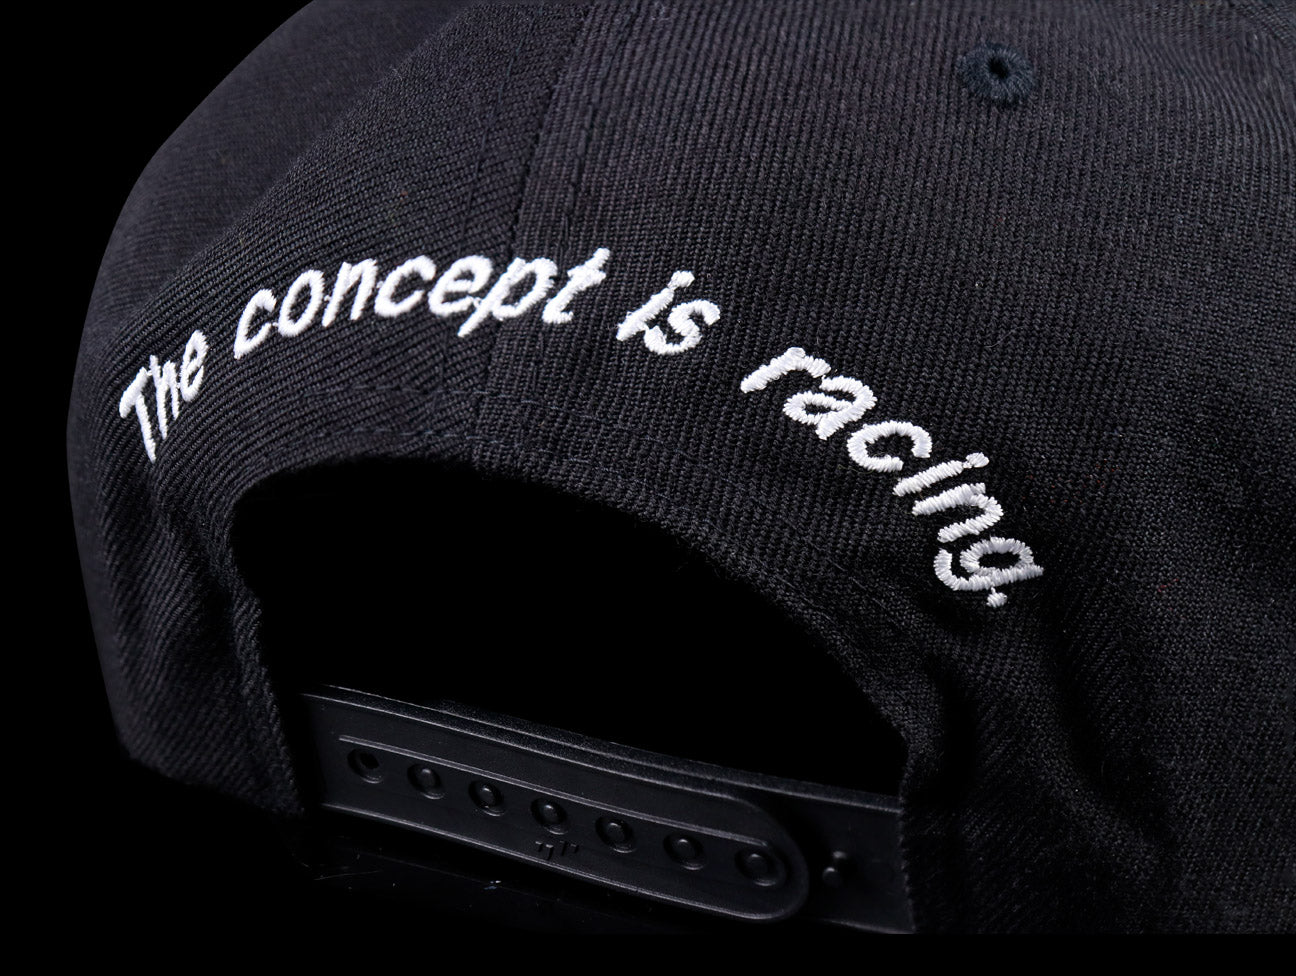 Rays The Concept is Racing Snapback Hat - Black